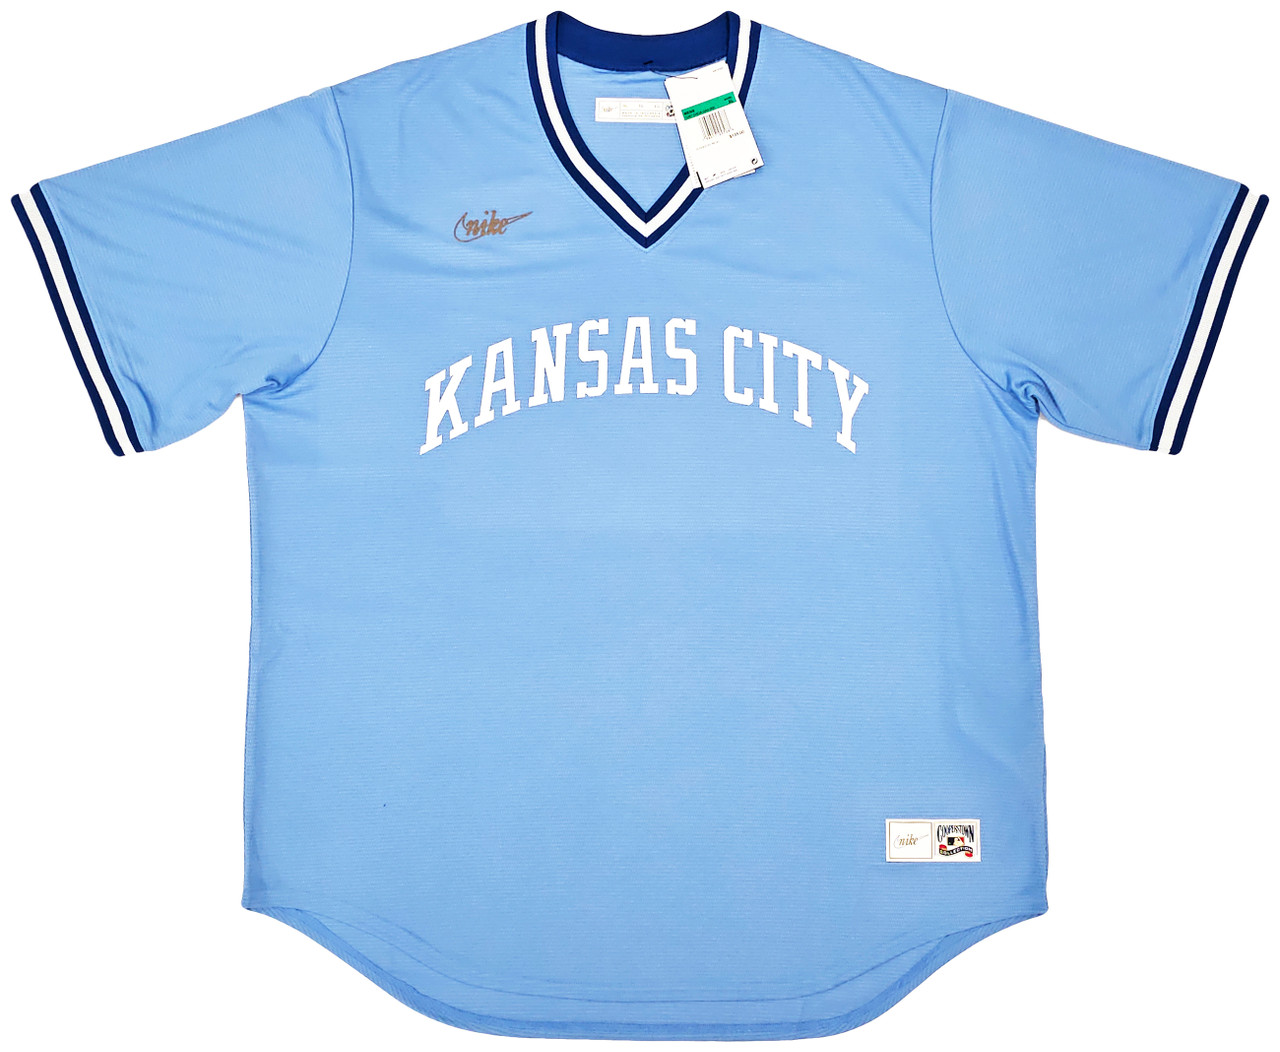 Kansas City Baseball Jersey Size L Cooperstown Collection By